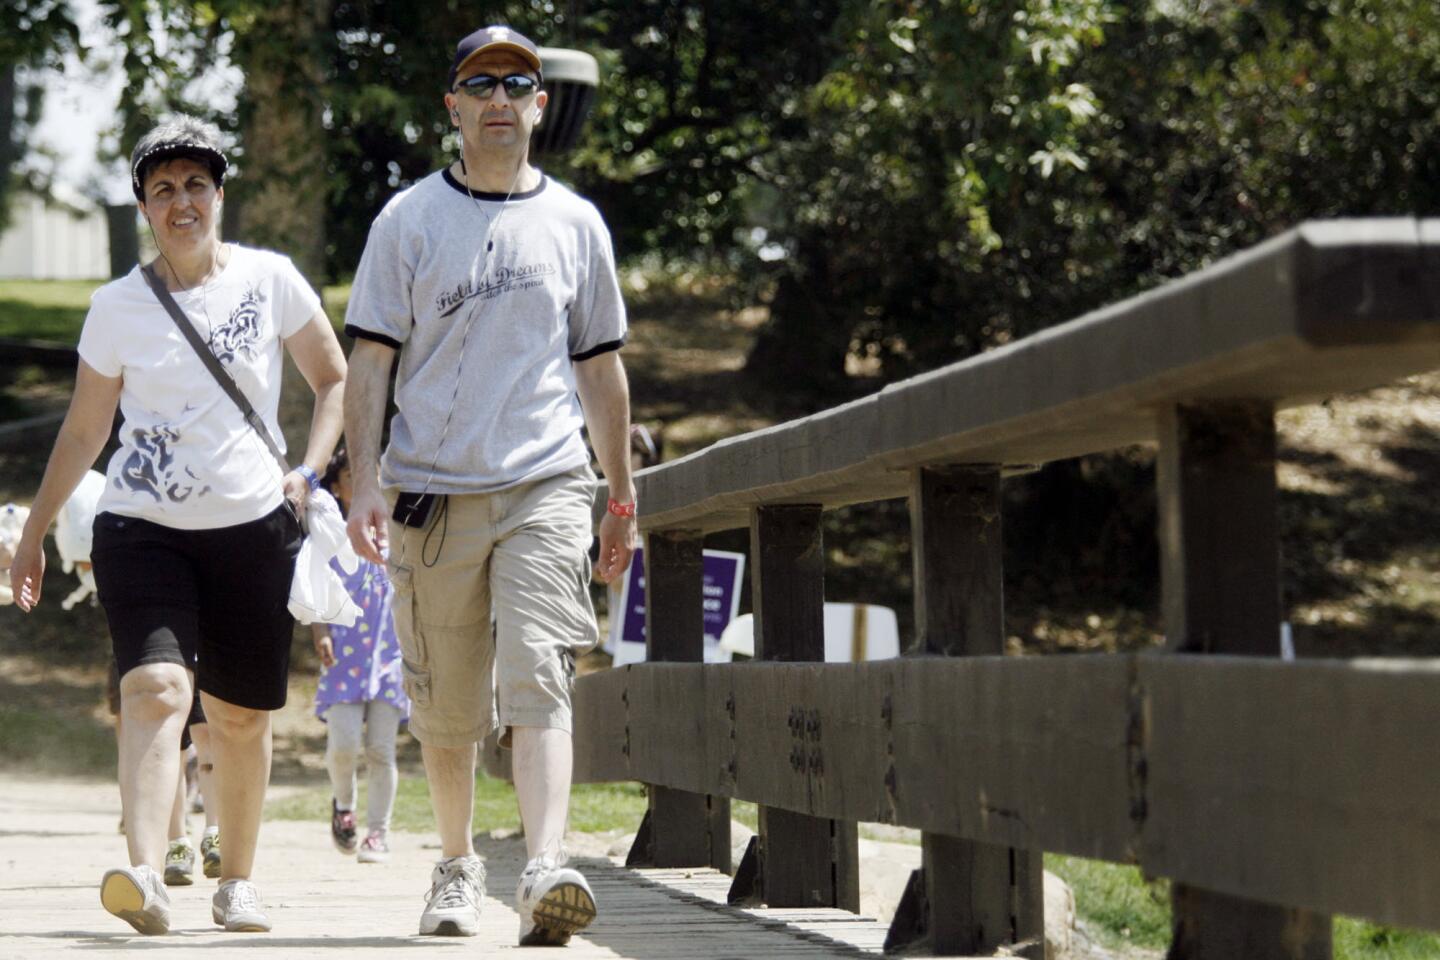 Juliet Ainian, left, and her husband, Edmond, participate in Relay for Life, which took place at Johnny Carson Park in Burbank on Saturday, May 4, 2013. Relay for Life benefits the American Cancer Society. "We're here for several friends who have overcome cancer," Juliet says.